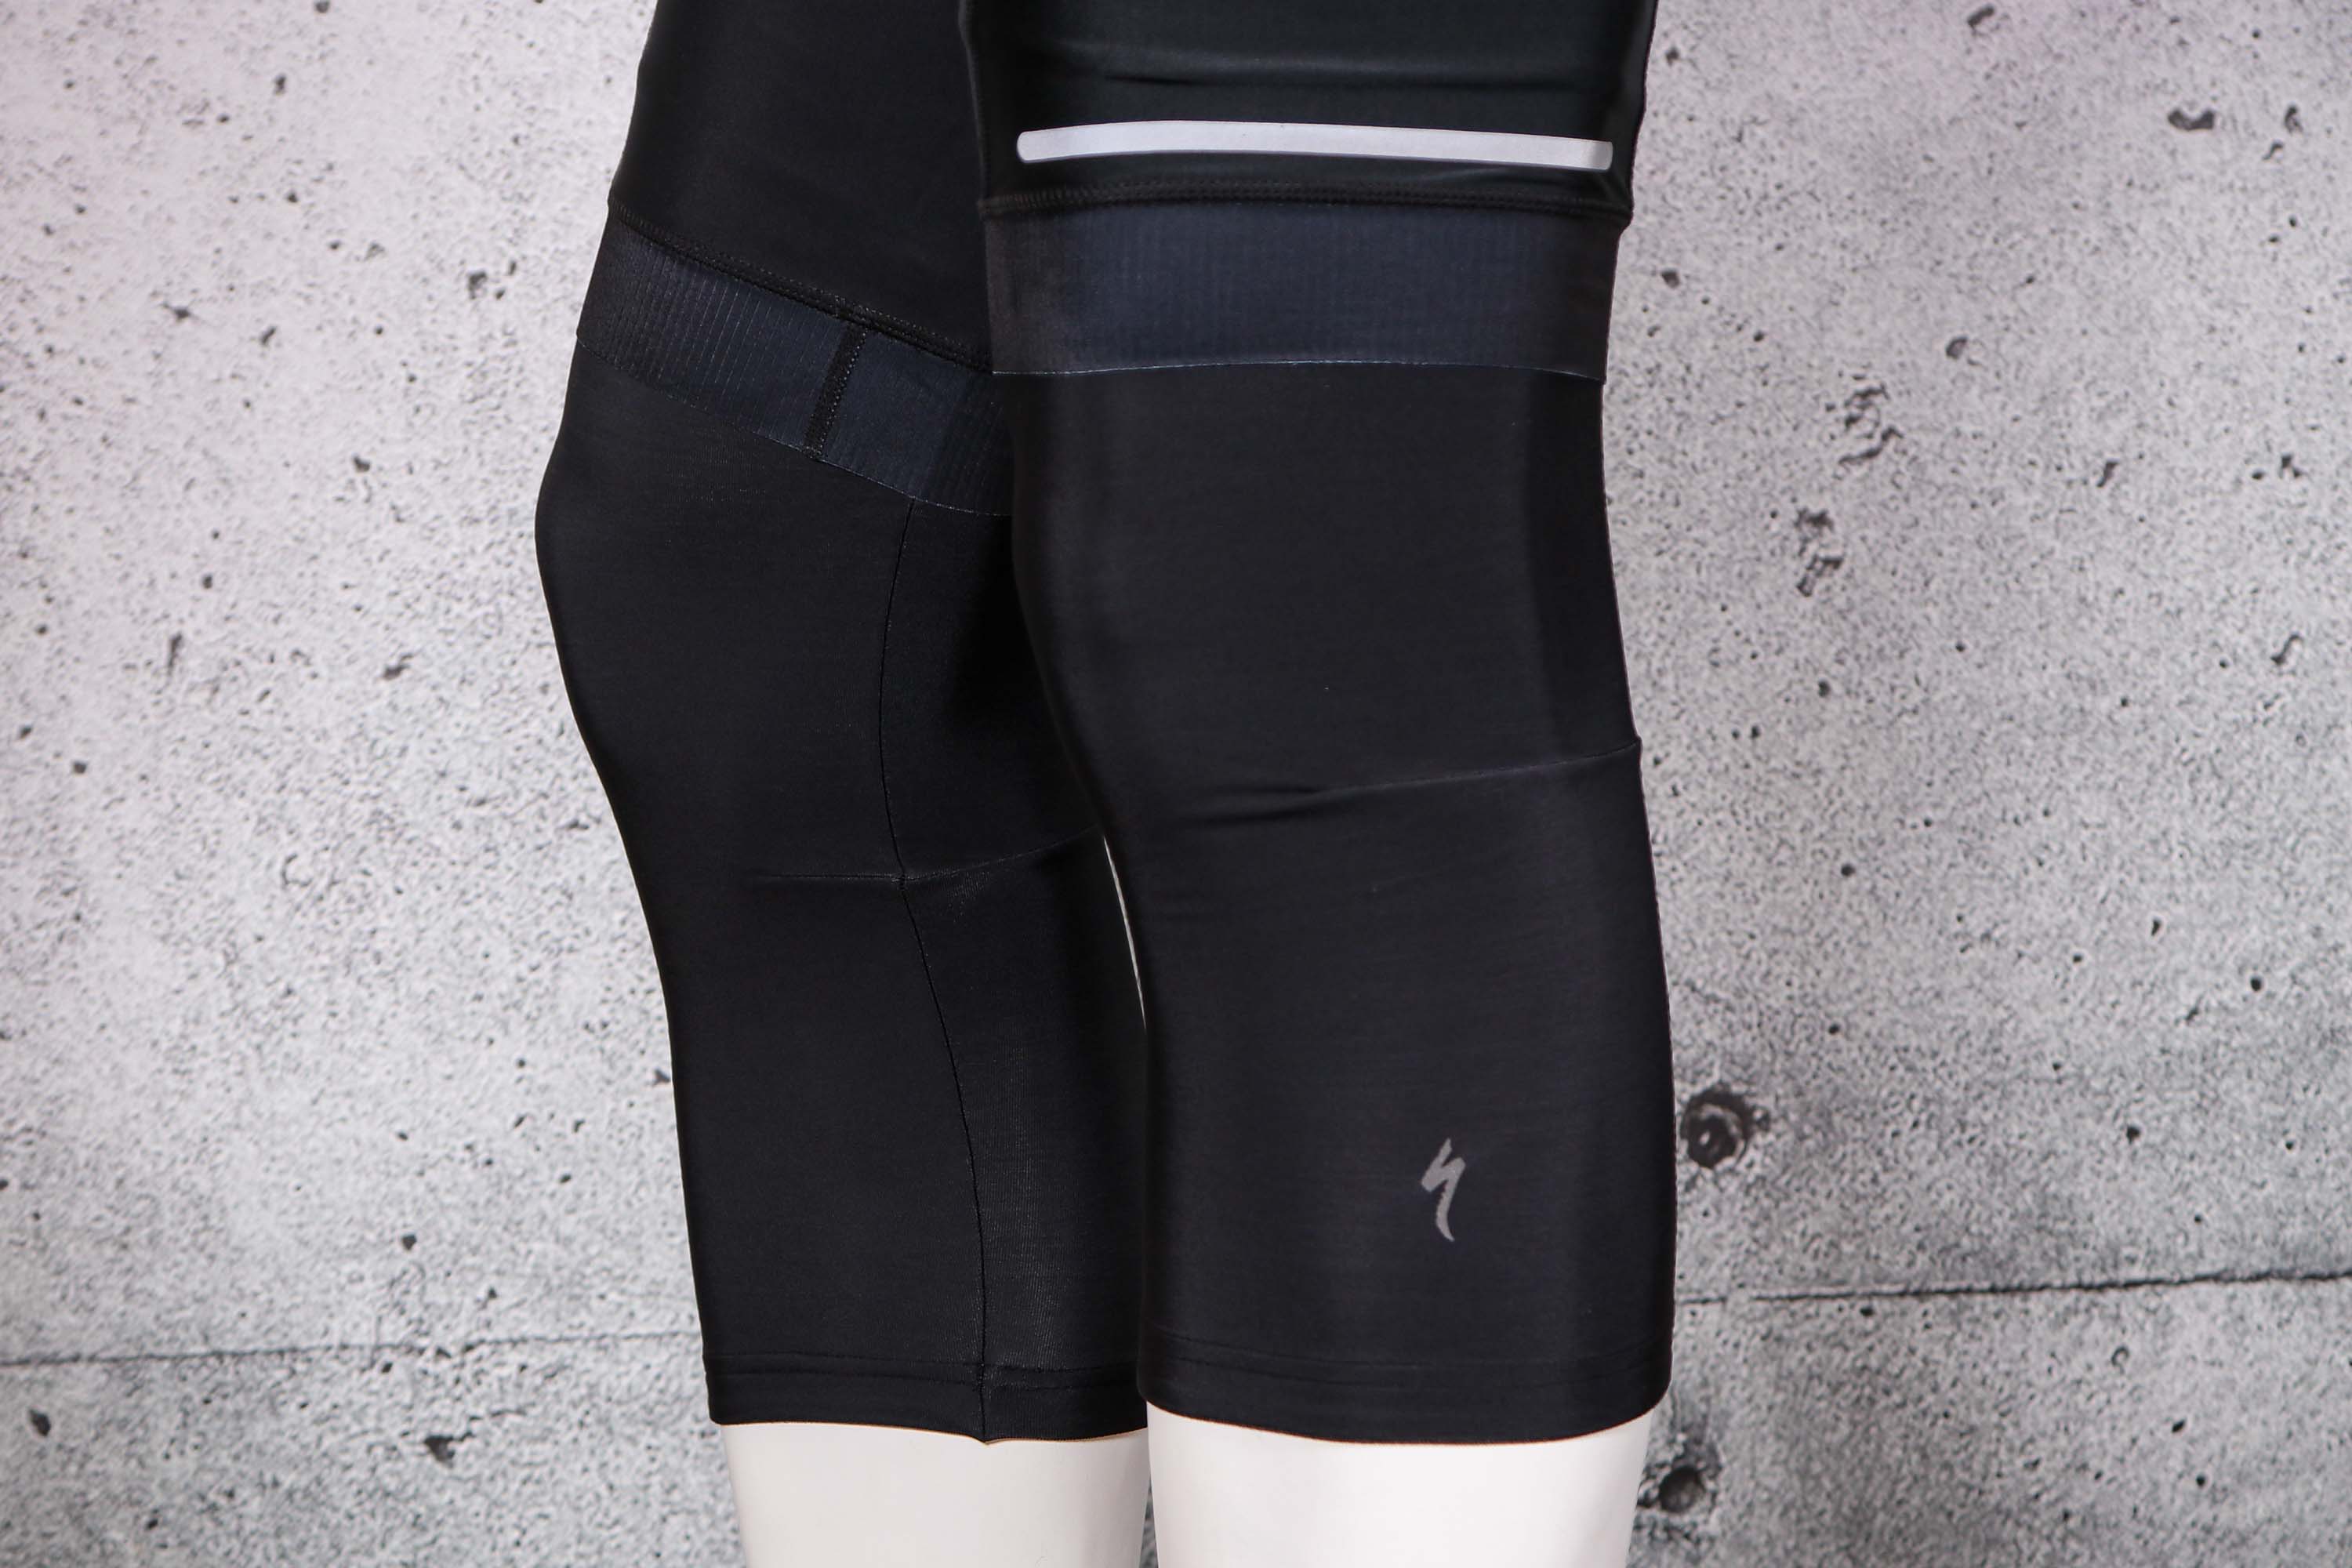 Review: Specialized Therminal knee warmers | road.cc